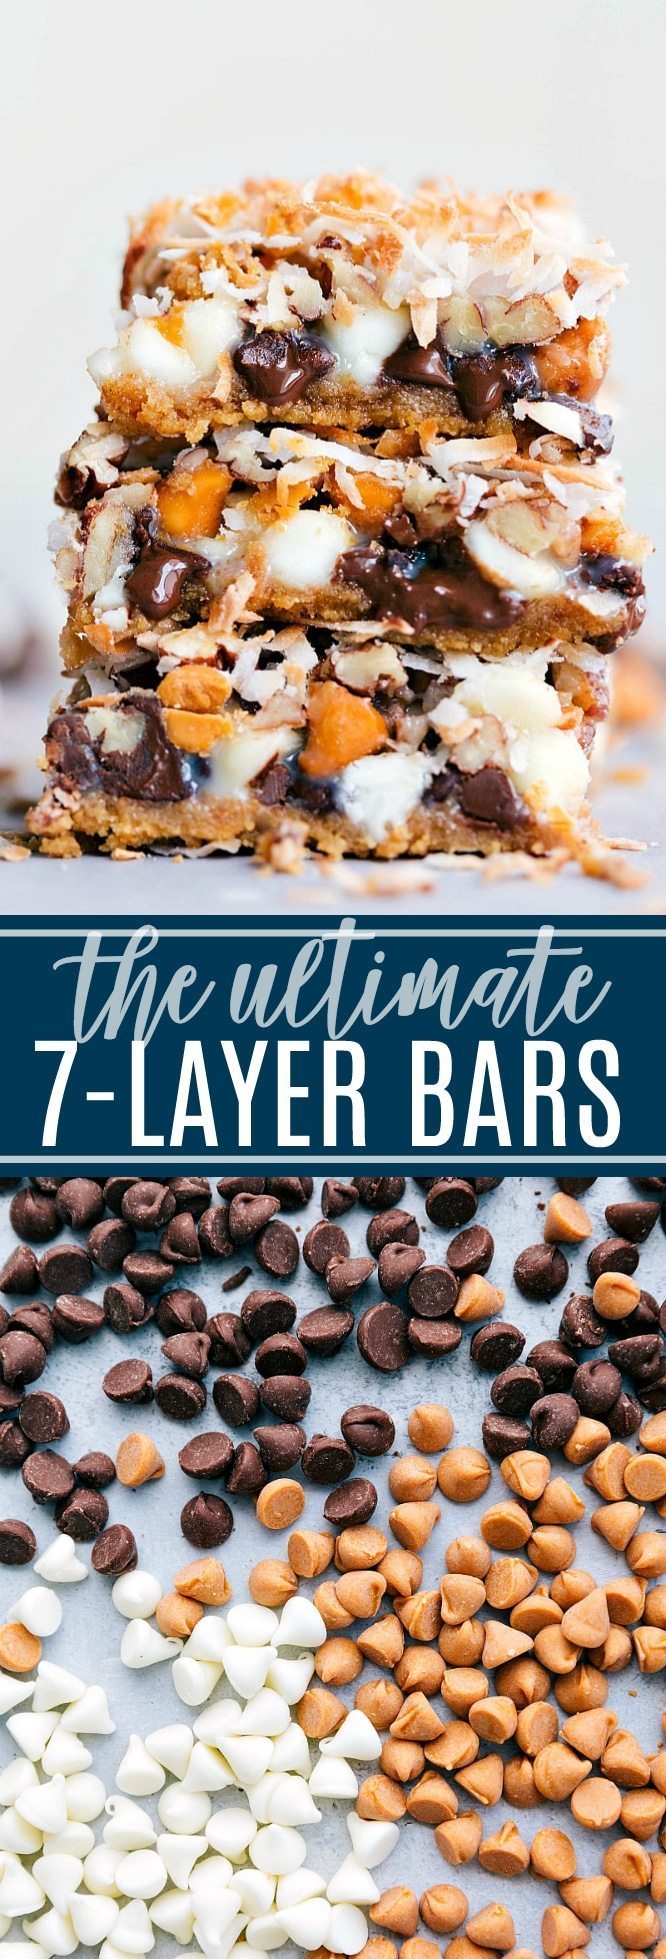 The ultimate BEST EVER 7 Layer bars! A super easy and quick ONE DISH dessert! via chelseasmessyapron.com